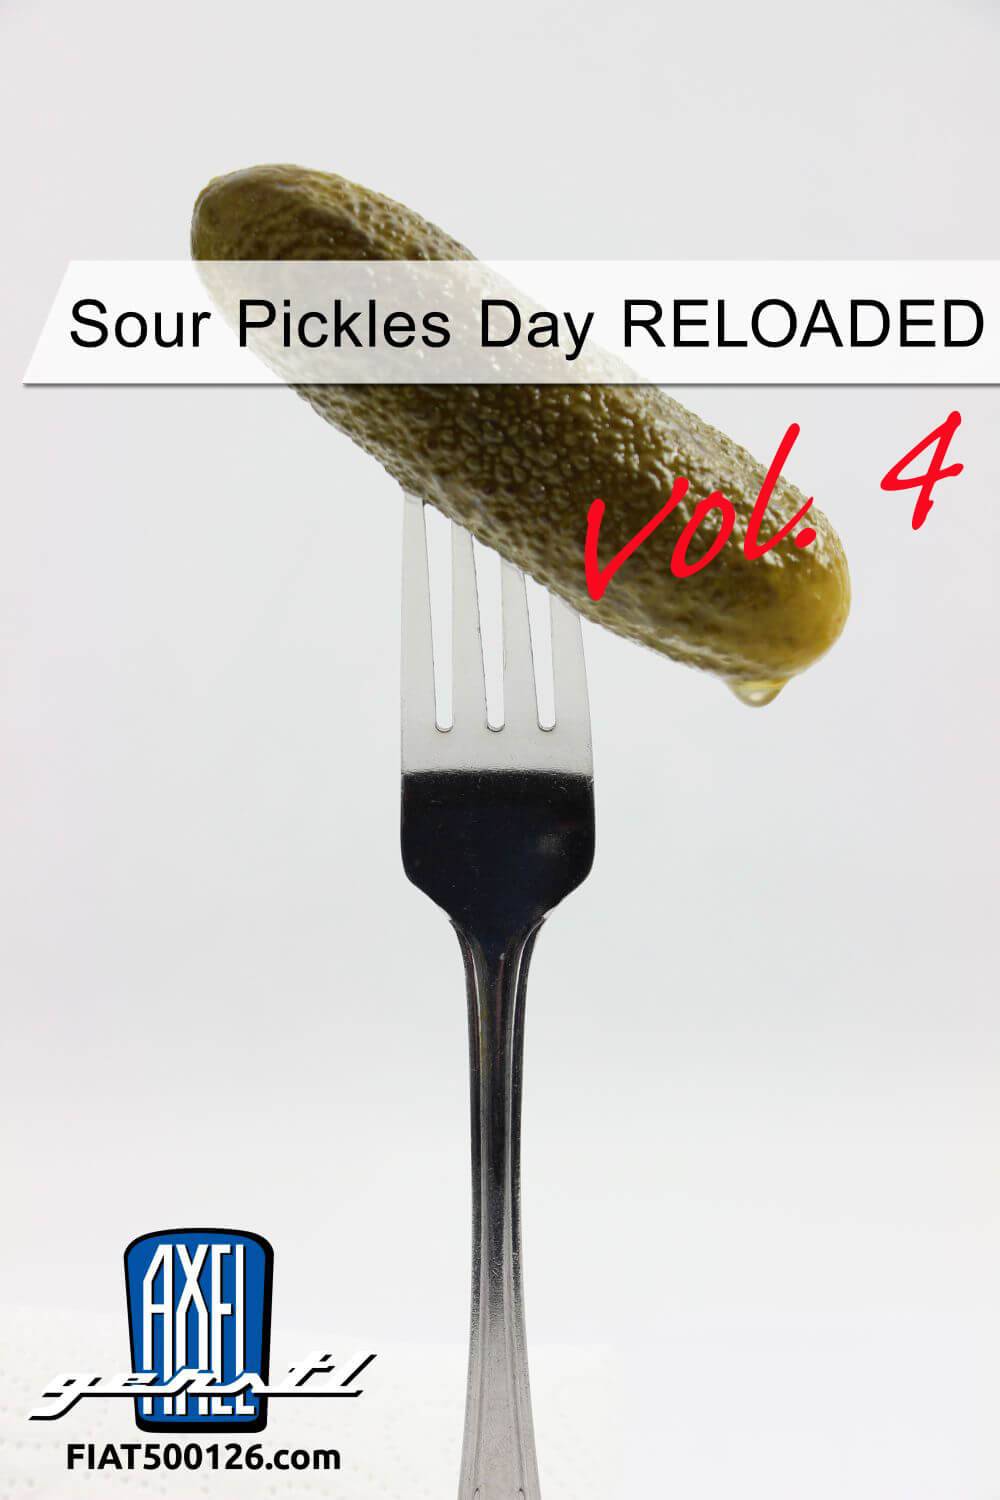 Sour Pickles Day 2019